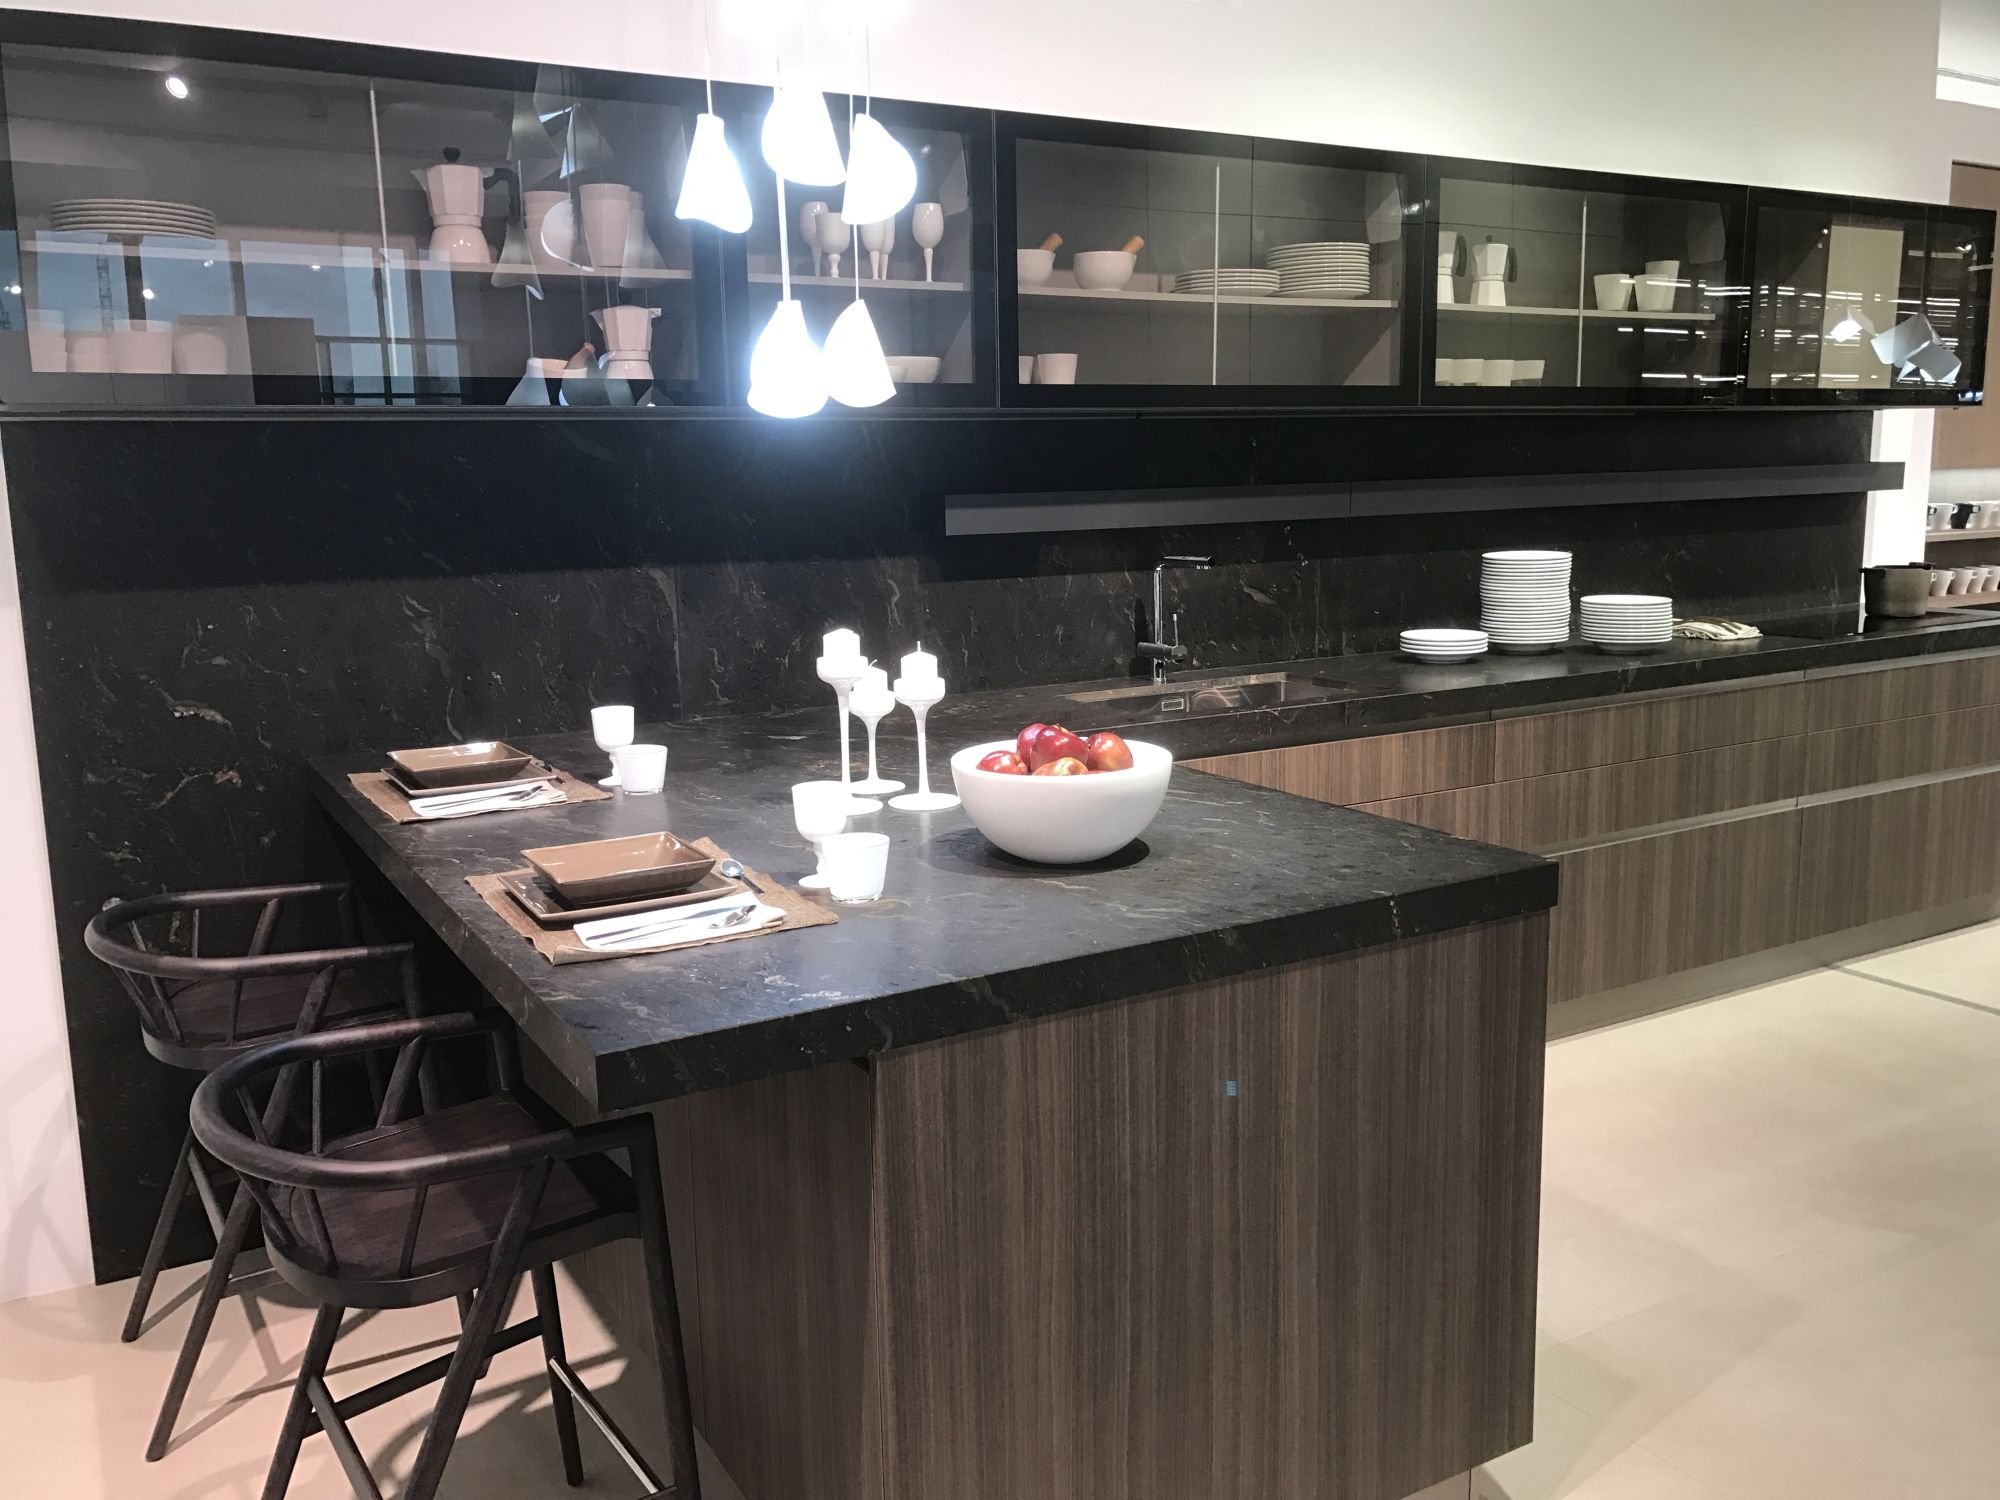 Contemporary dark kitchen furniture with wood inspired ceramic tiles - GamaDecor